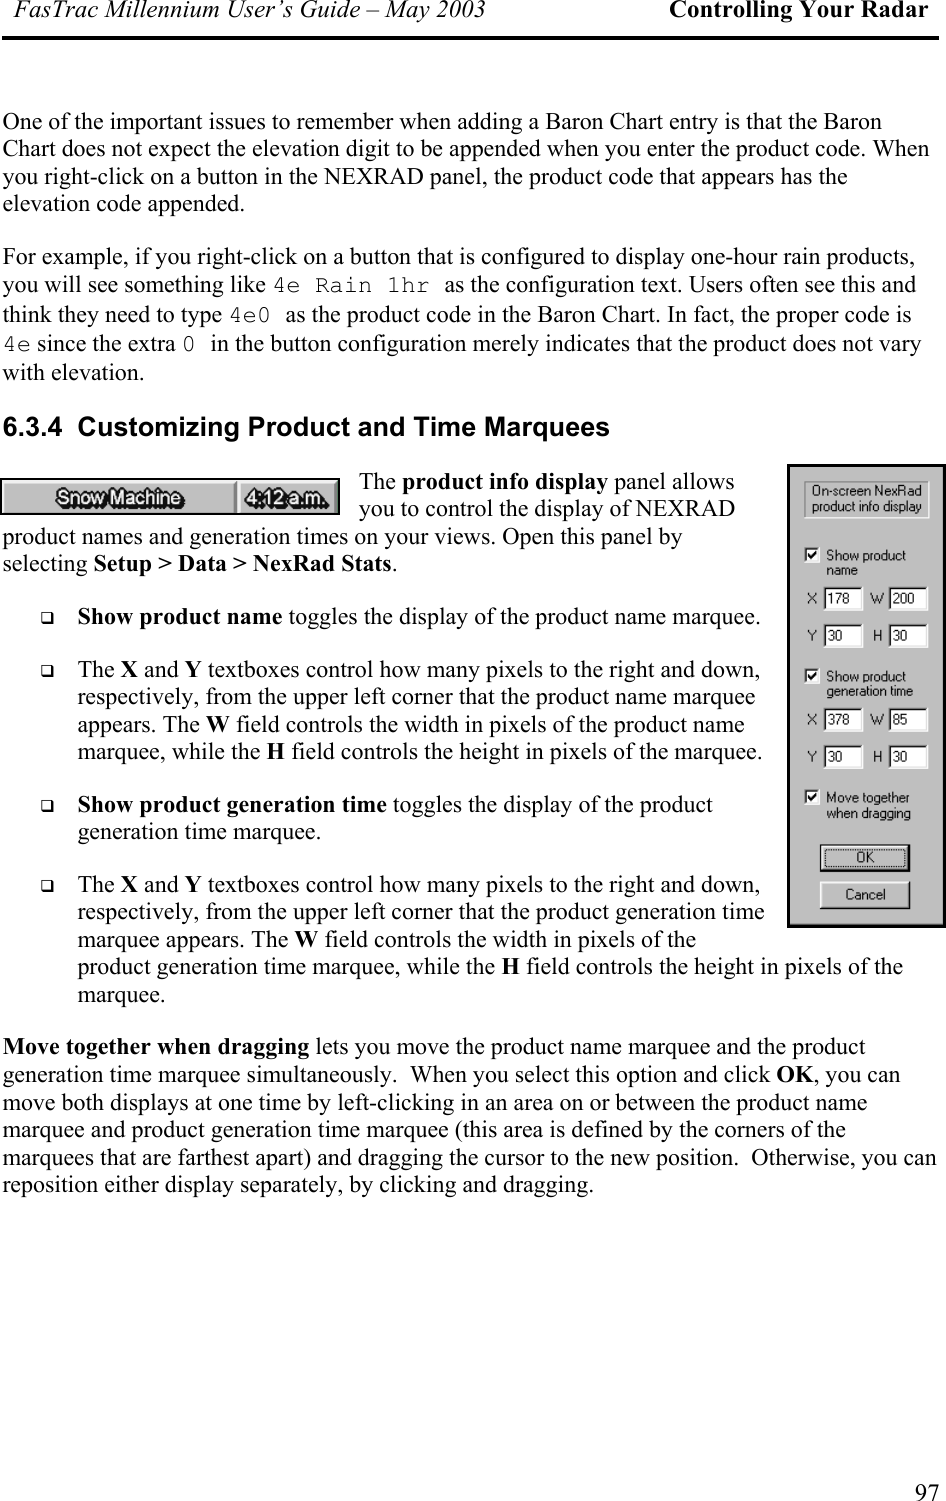 FasTrac Millennium User’s Guide – May 2003 Controlling Your Radar One of the important issues to remember when adding a Baron Chart entry is that the Baron Chart does not expect the elevation digit to be appended when you enter the product code. When you right-click on a button in the NEXRAD panel, the product code that appears has the elevation code appended. For example, if you right-click on a button that is configured to display one-hour rain products, you will see something like 4e Rain 1hr as the configuration text. Users often see this and think they need to type 4e0 as the product code in the Baron Chart. In fact, the proper code is 4e since the extra 0 in the button configuration merely indicates that the product does not vary with elevation. 6.3.4  Customizing Product and Time Marquees The product info display panel allows you to control the display of NEXRAD product names and generation times on your views. Open this panel by selecting Setup &gt; Data &gt; NexRad Stats.   Show product name toggles the display of the product name marquee.   The X and Y textboxes control how many pixels to the right and down, respectively, from the upper left corner that the product name marquee appears. The W field controls the width in pixels of the product name marquee, while the H field controls the height in pixels of the marquee.   Show product generation time toggles the display of the product generation time marquee.   The X and Y textboxes control how many pixels to the right and down, respectively, from the upper left corner that the product generation time marquee appears. The W field controls the width in pixels of the product generation time marquee, while the H field controls the height in pixels of the marquee. Move together when dragging lets you move the product name marquee and the product generation time marquee simultaneously.  When you select this option and click OK, you can move both displays at one time by left-clicking in an area on or between the product name marquee and product generation time marquee (this area is defined by the corners of the marquees that are farthest apart) and dragging the cursor to the new position.  Otherwise, you can reposition either display separately, by clicking and dragging. 97 